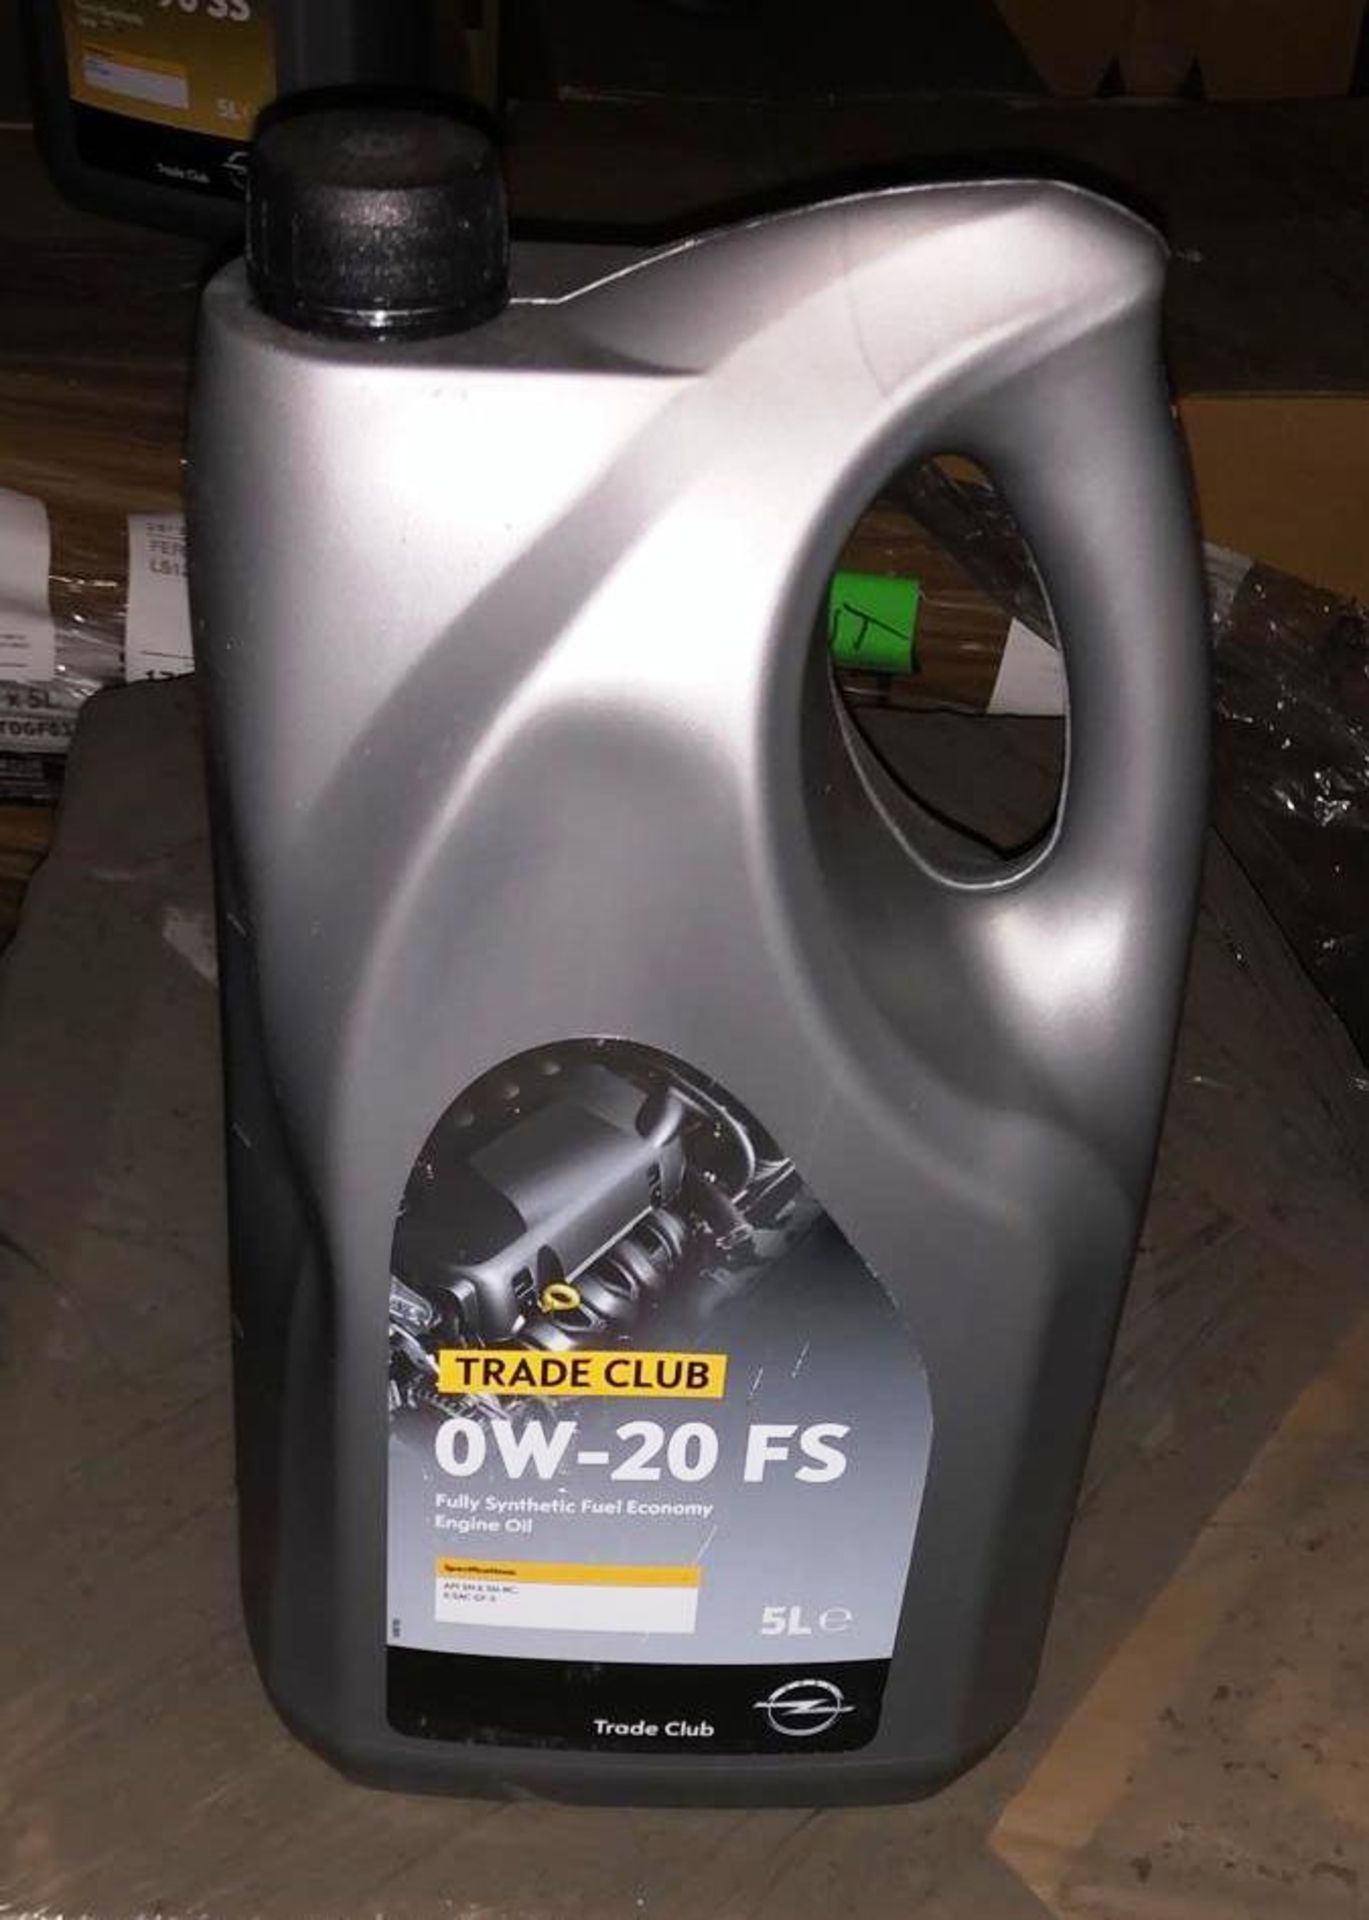 52 x 5 litre tubs of Trade Club 0W-20 FS fully synthetic fuel economy engine oil on 1 pallet (pallet - Image 2 of 6